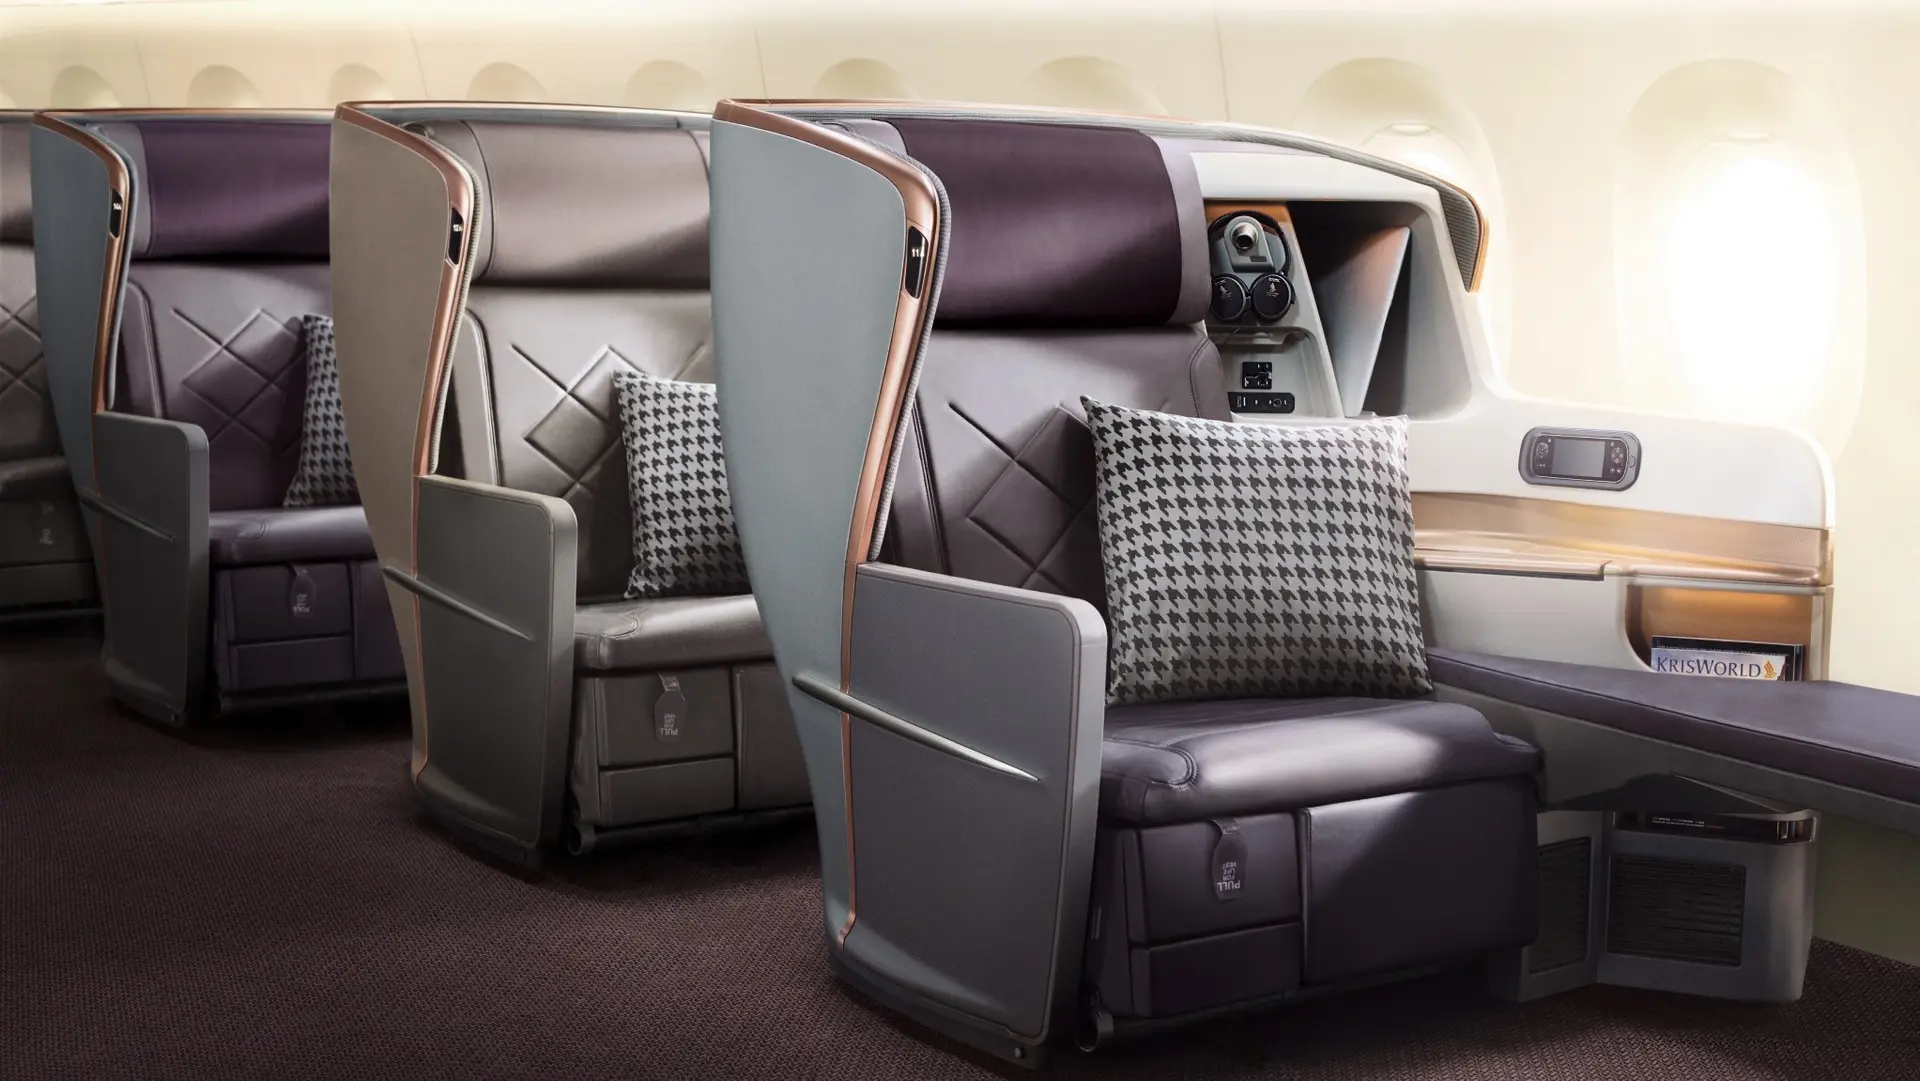 Airline review Cabin & Seat - Singapore Airlines - 0